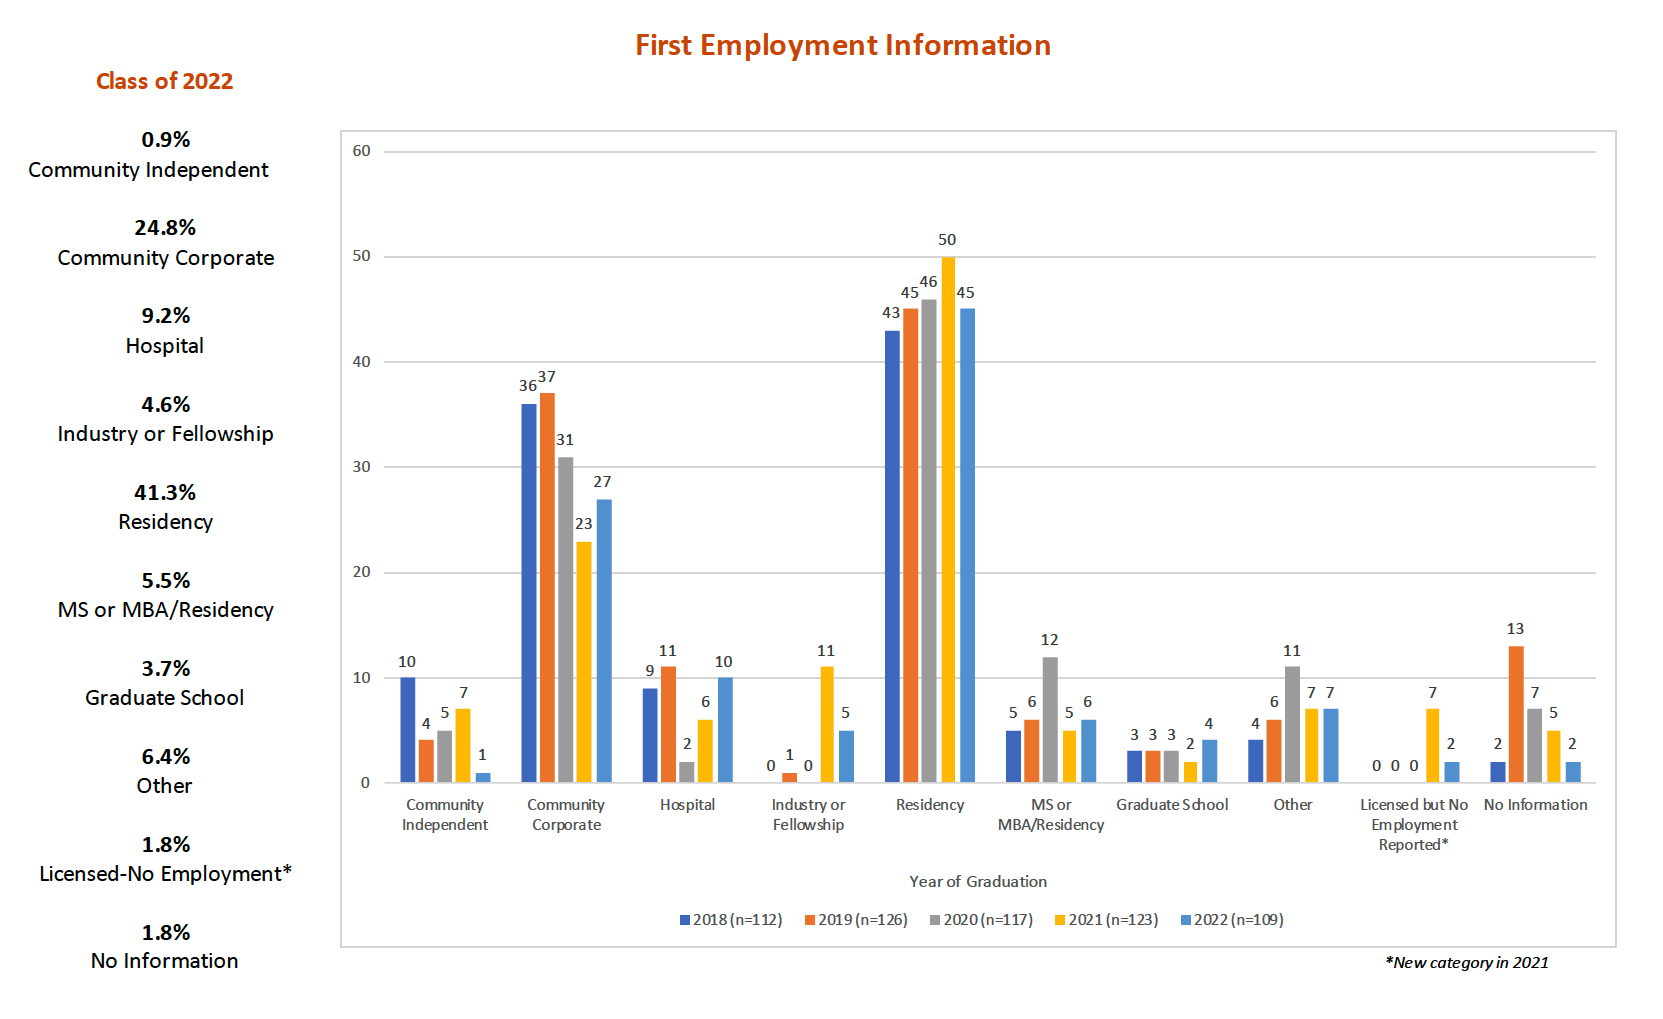 First employment data for Pharm.D. Students graduating in 2018 through 2022